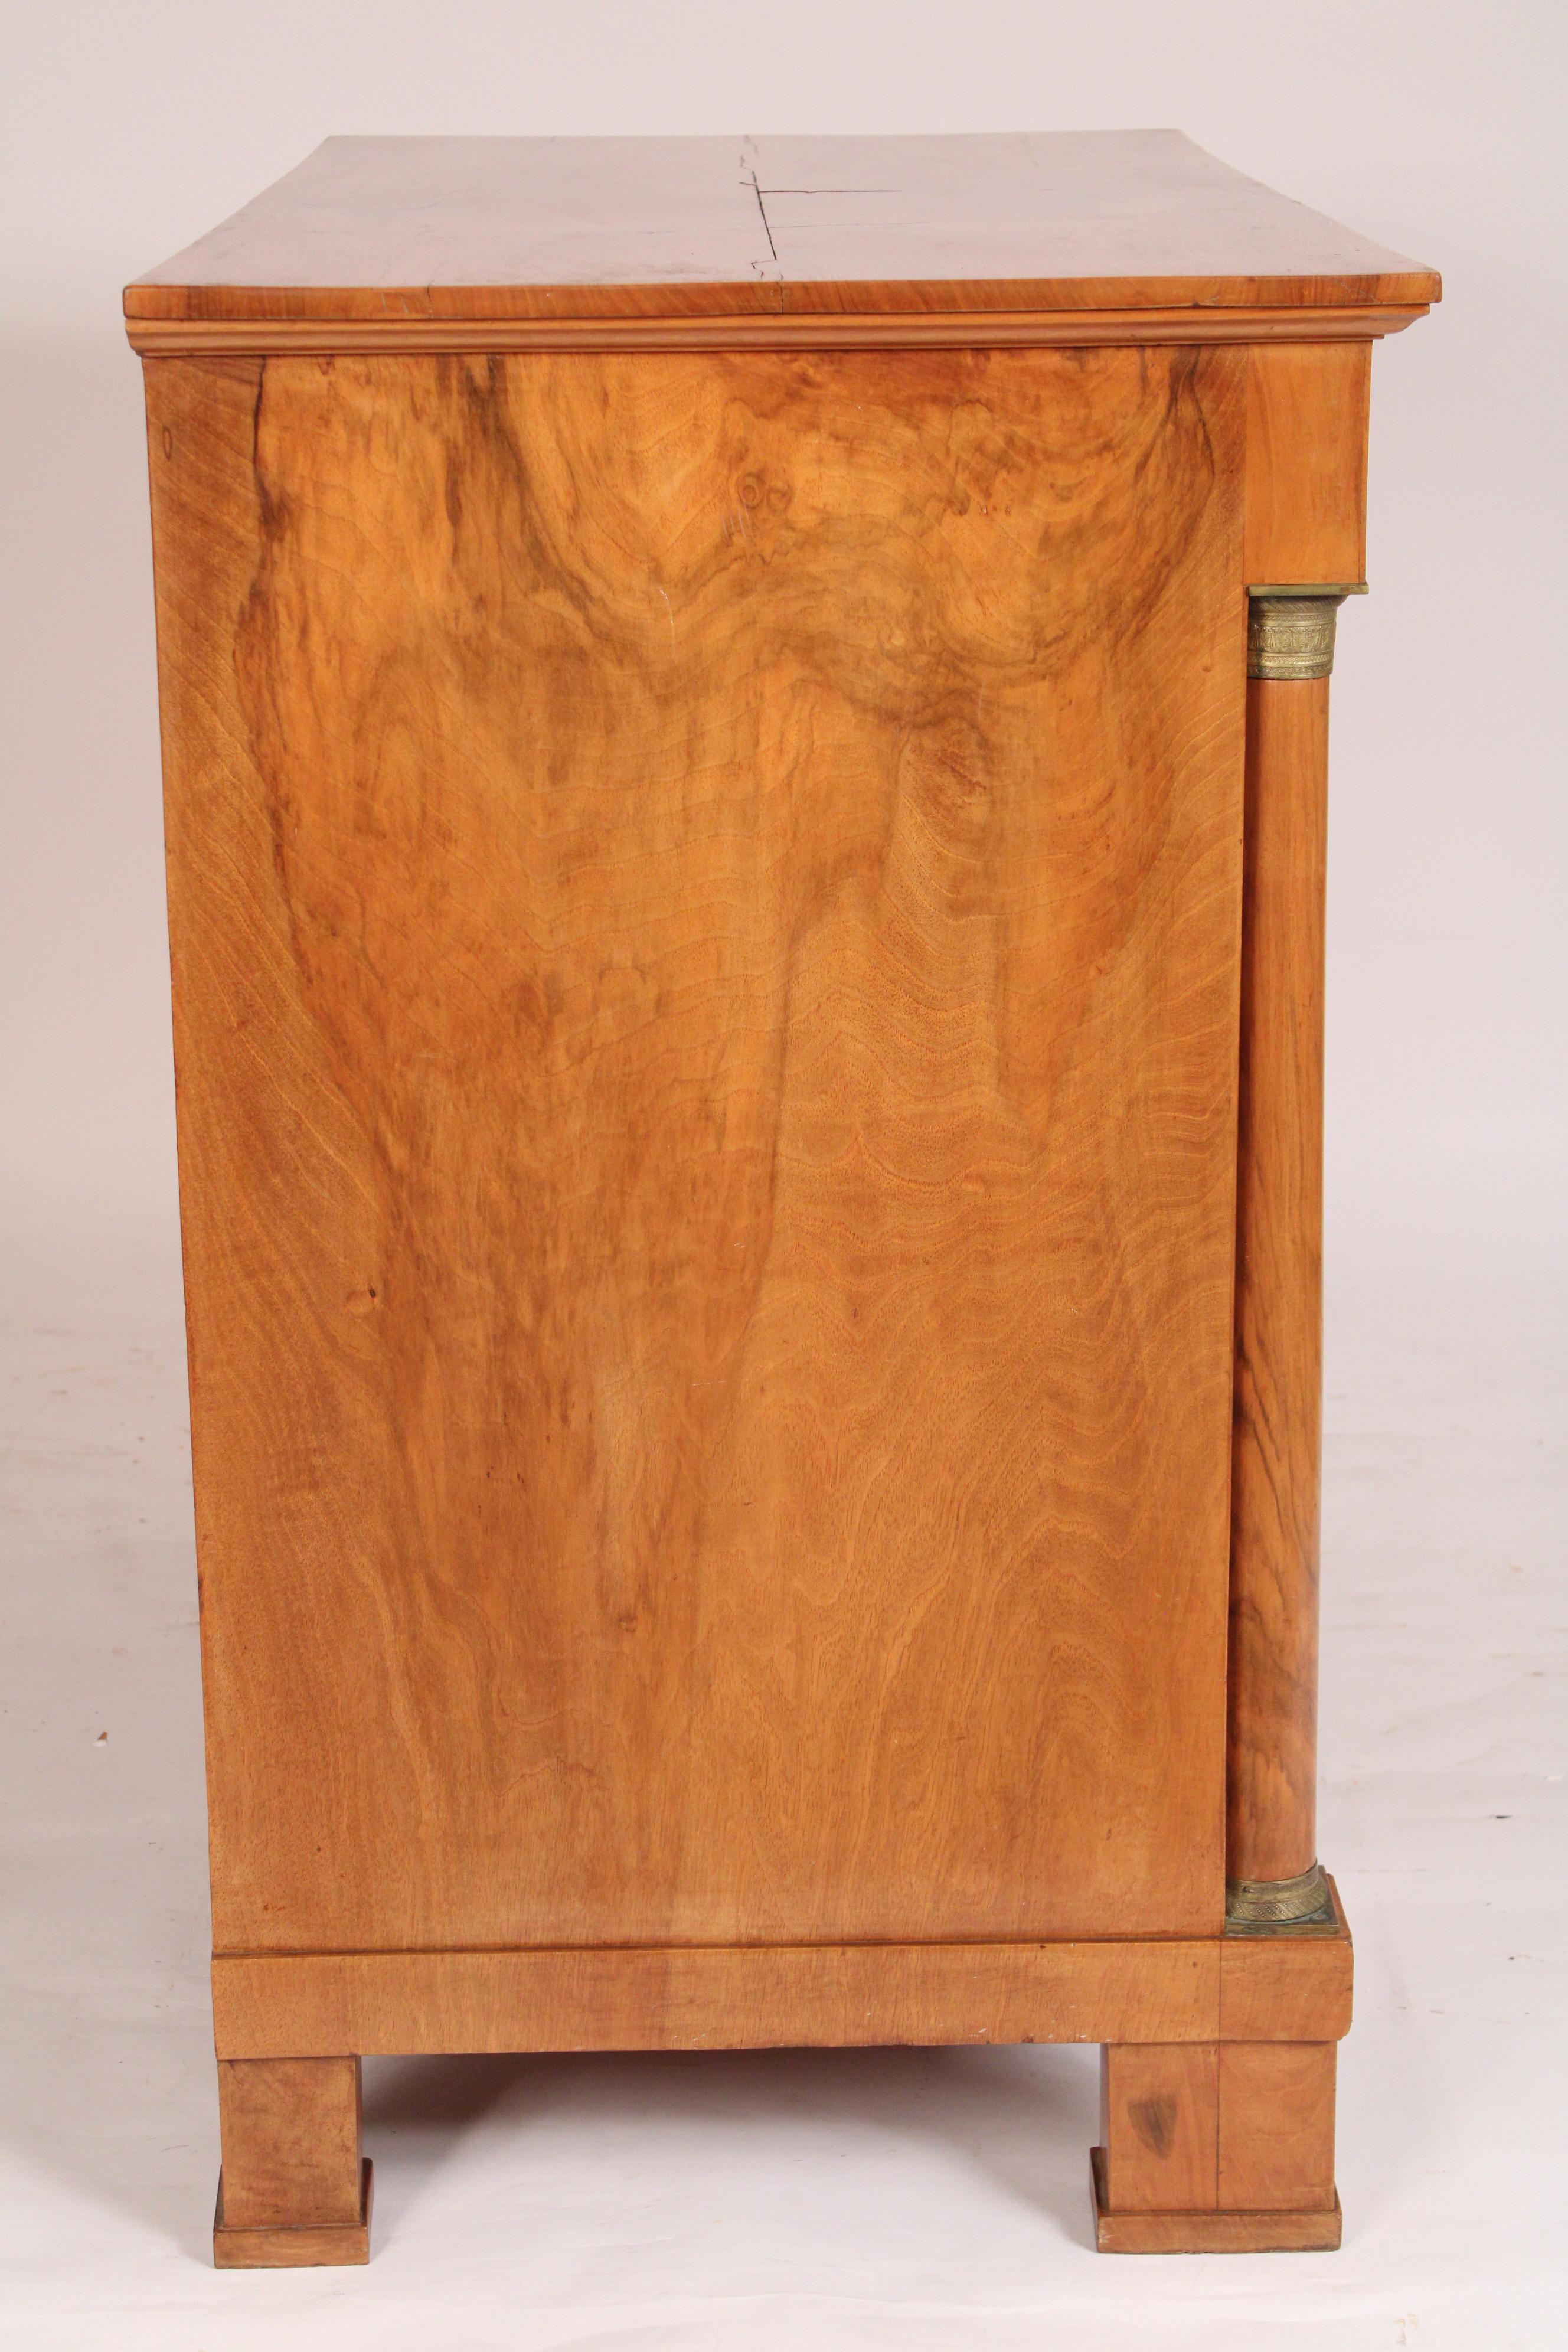 Antique Empire Style Burl Walnut Chest Of Drawers In Good Condition For Sale In Laguna Beach, CA